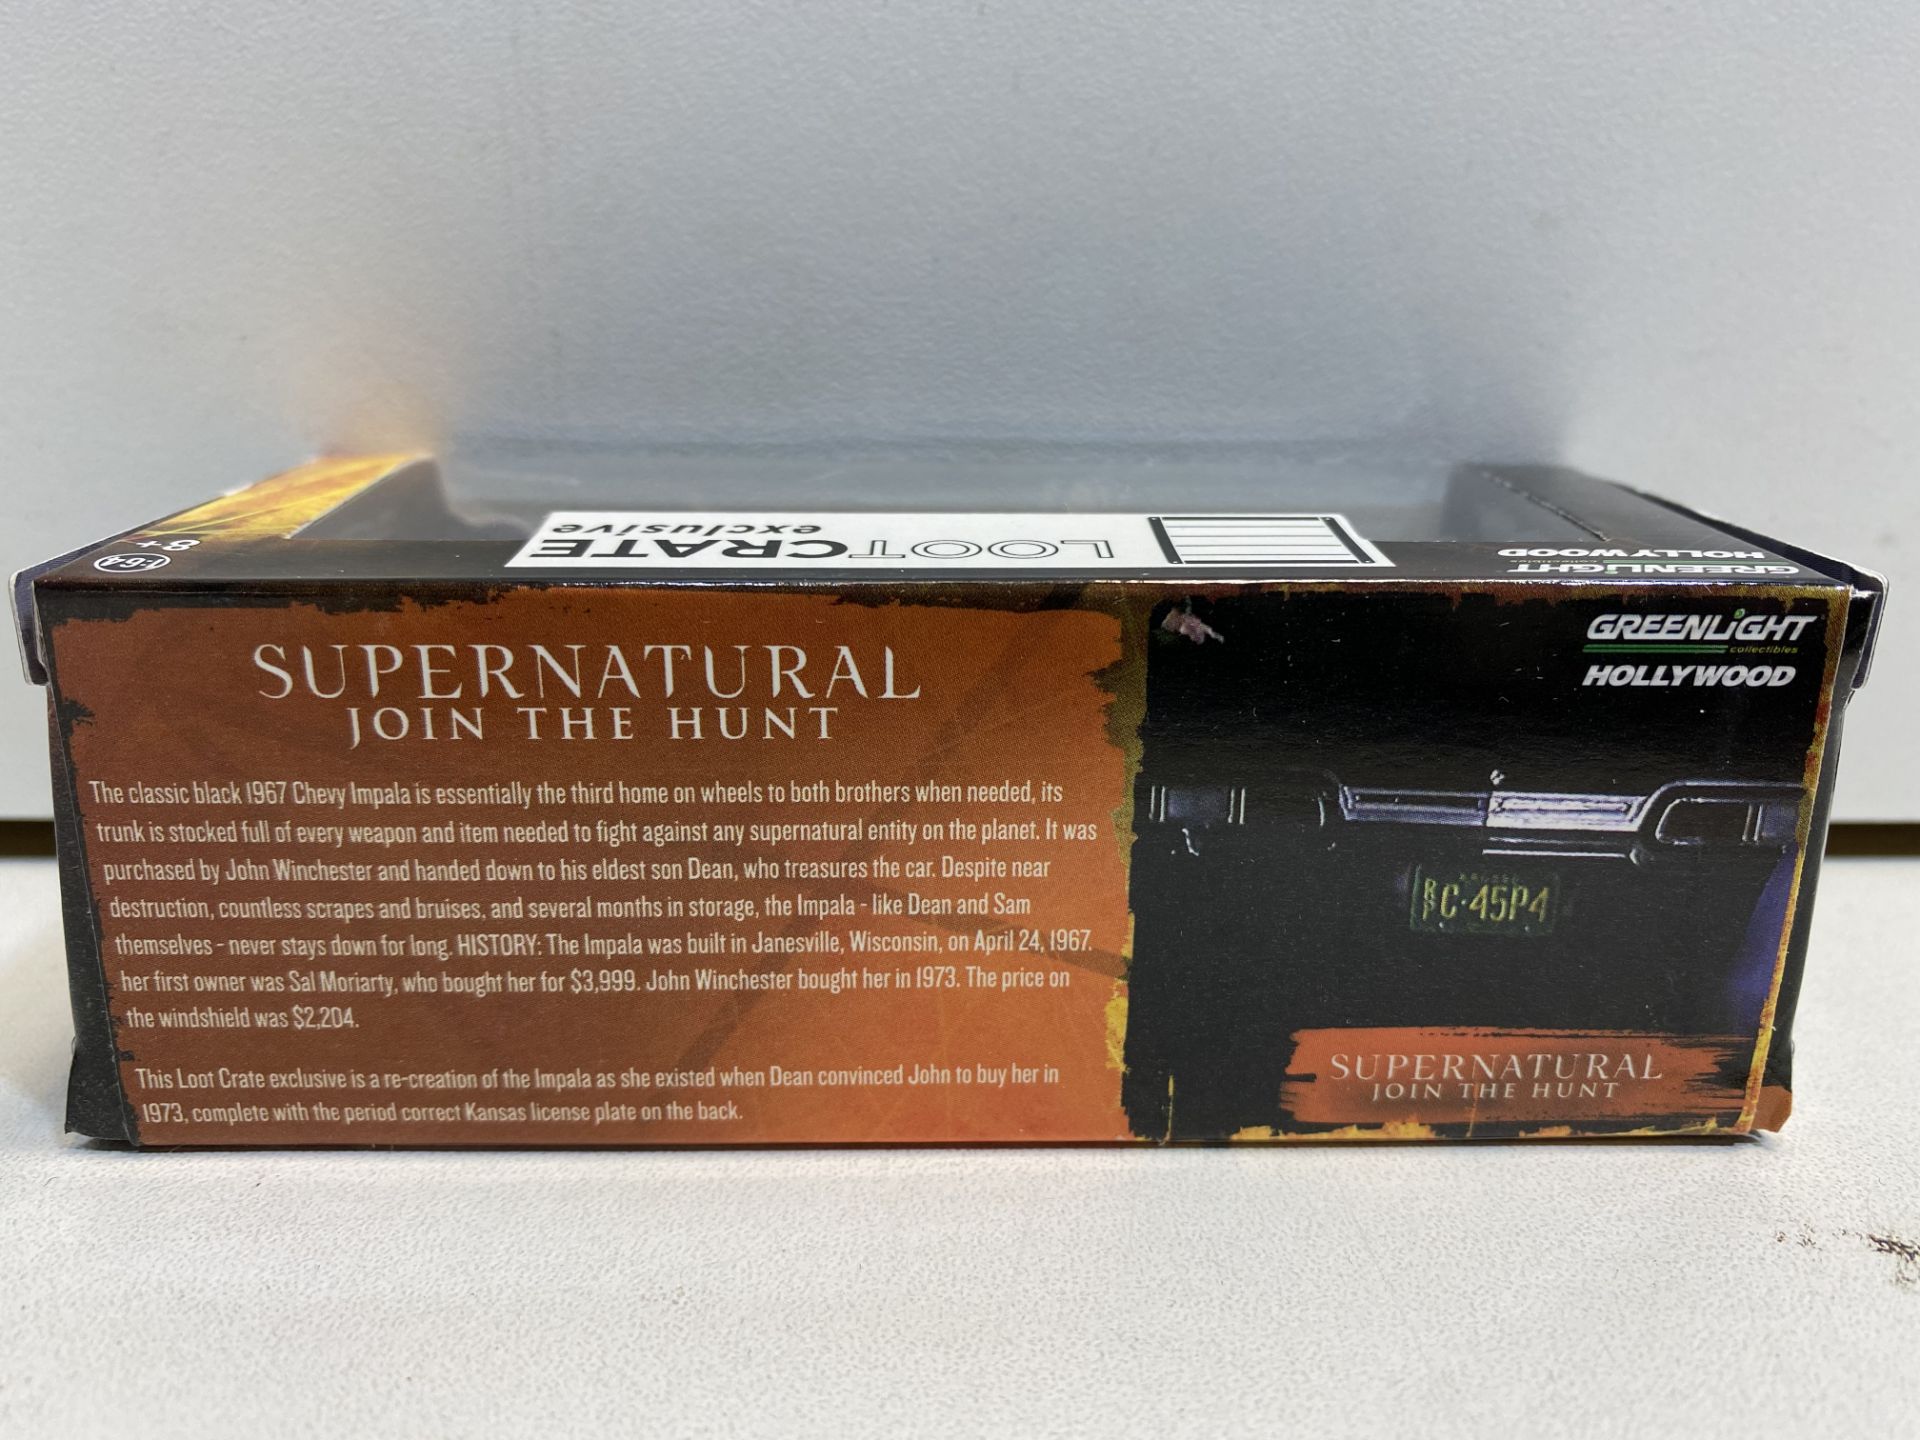 25 x Chevrolet Impala - Supernatural - Loot Crate Exclusive - Image 3 of 3